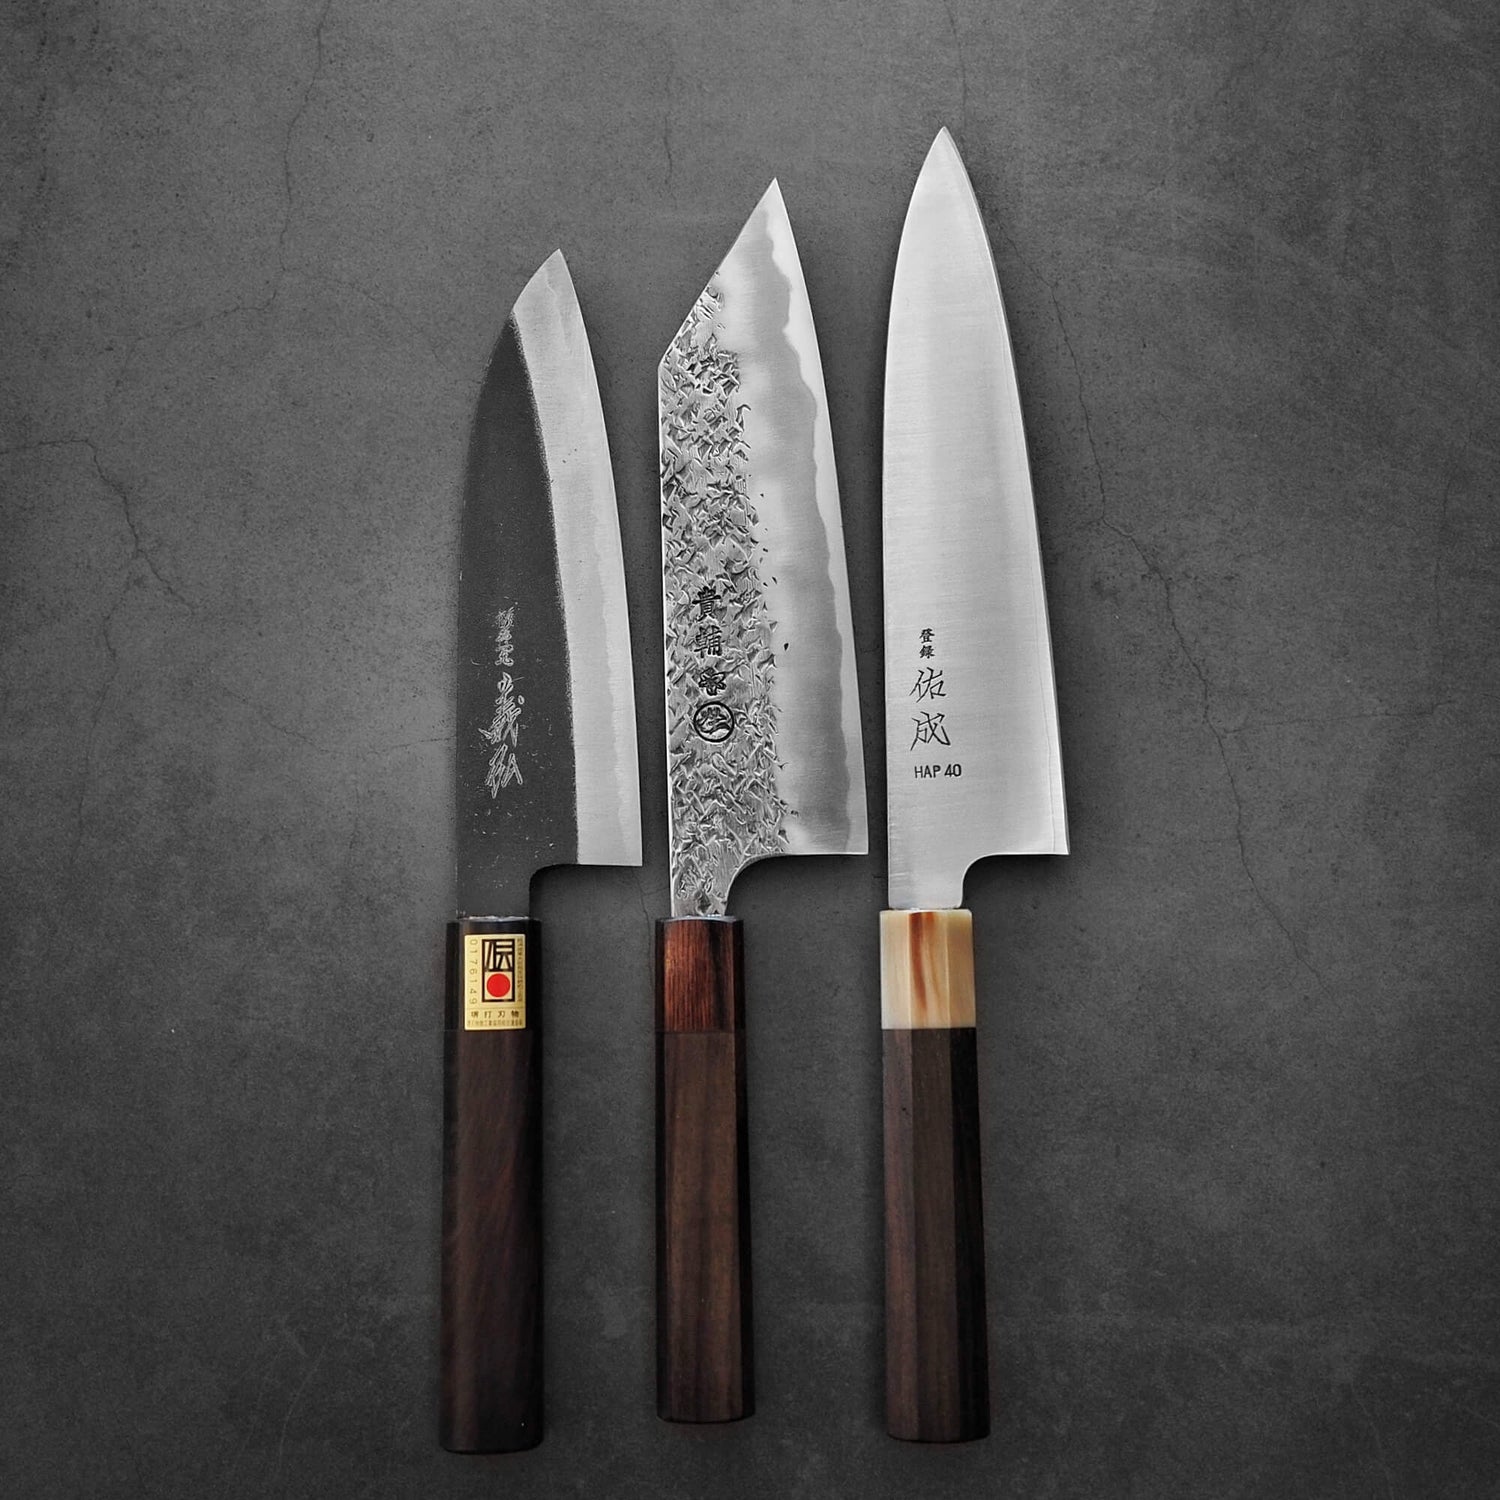 Top view of a trio of versatile Japanese knives including santoku, bunka, and gyuto are displayed. The Yoshihiro kurouchi santoku is positioned on the left, the Manaka tsuchime bunka in the middle, and the Sukenari Hap40 gyuto is showcased on the right.